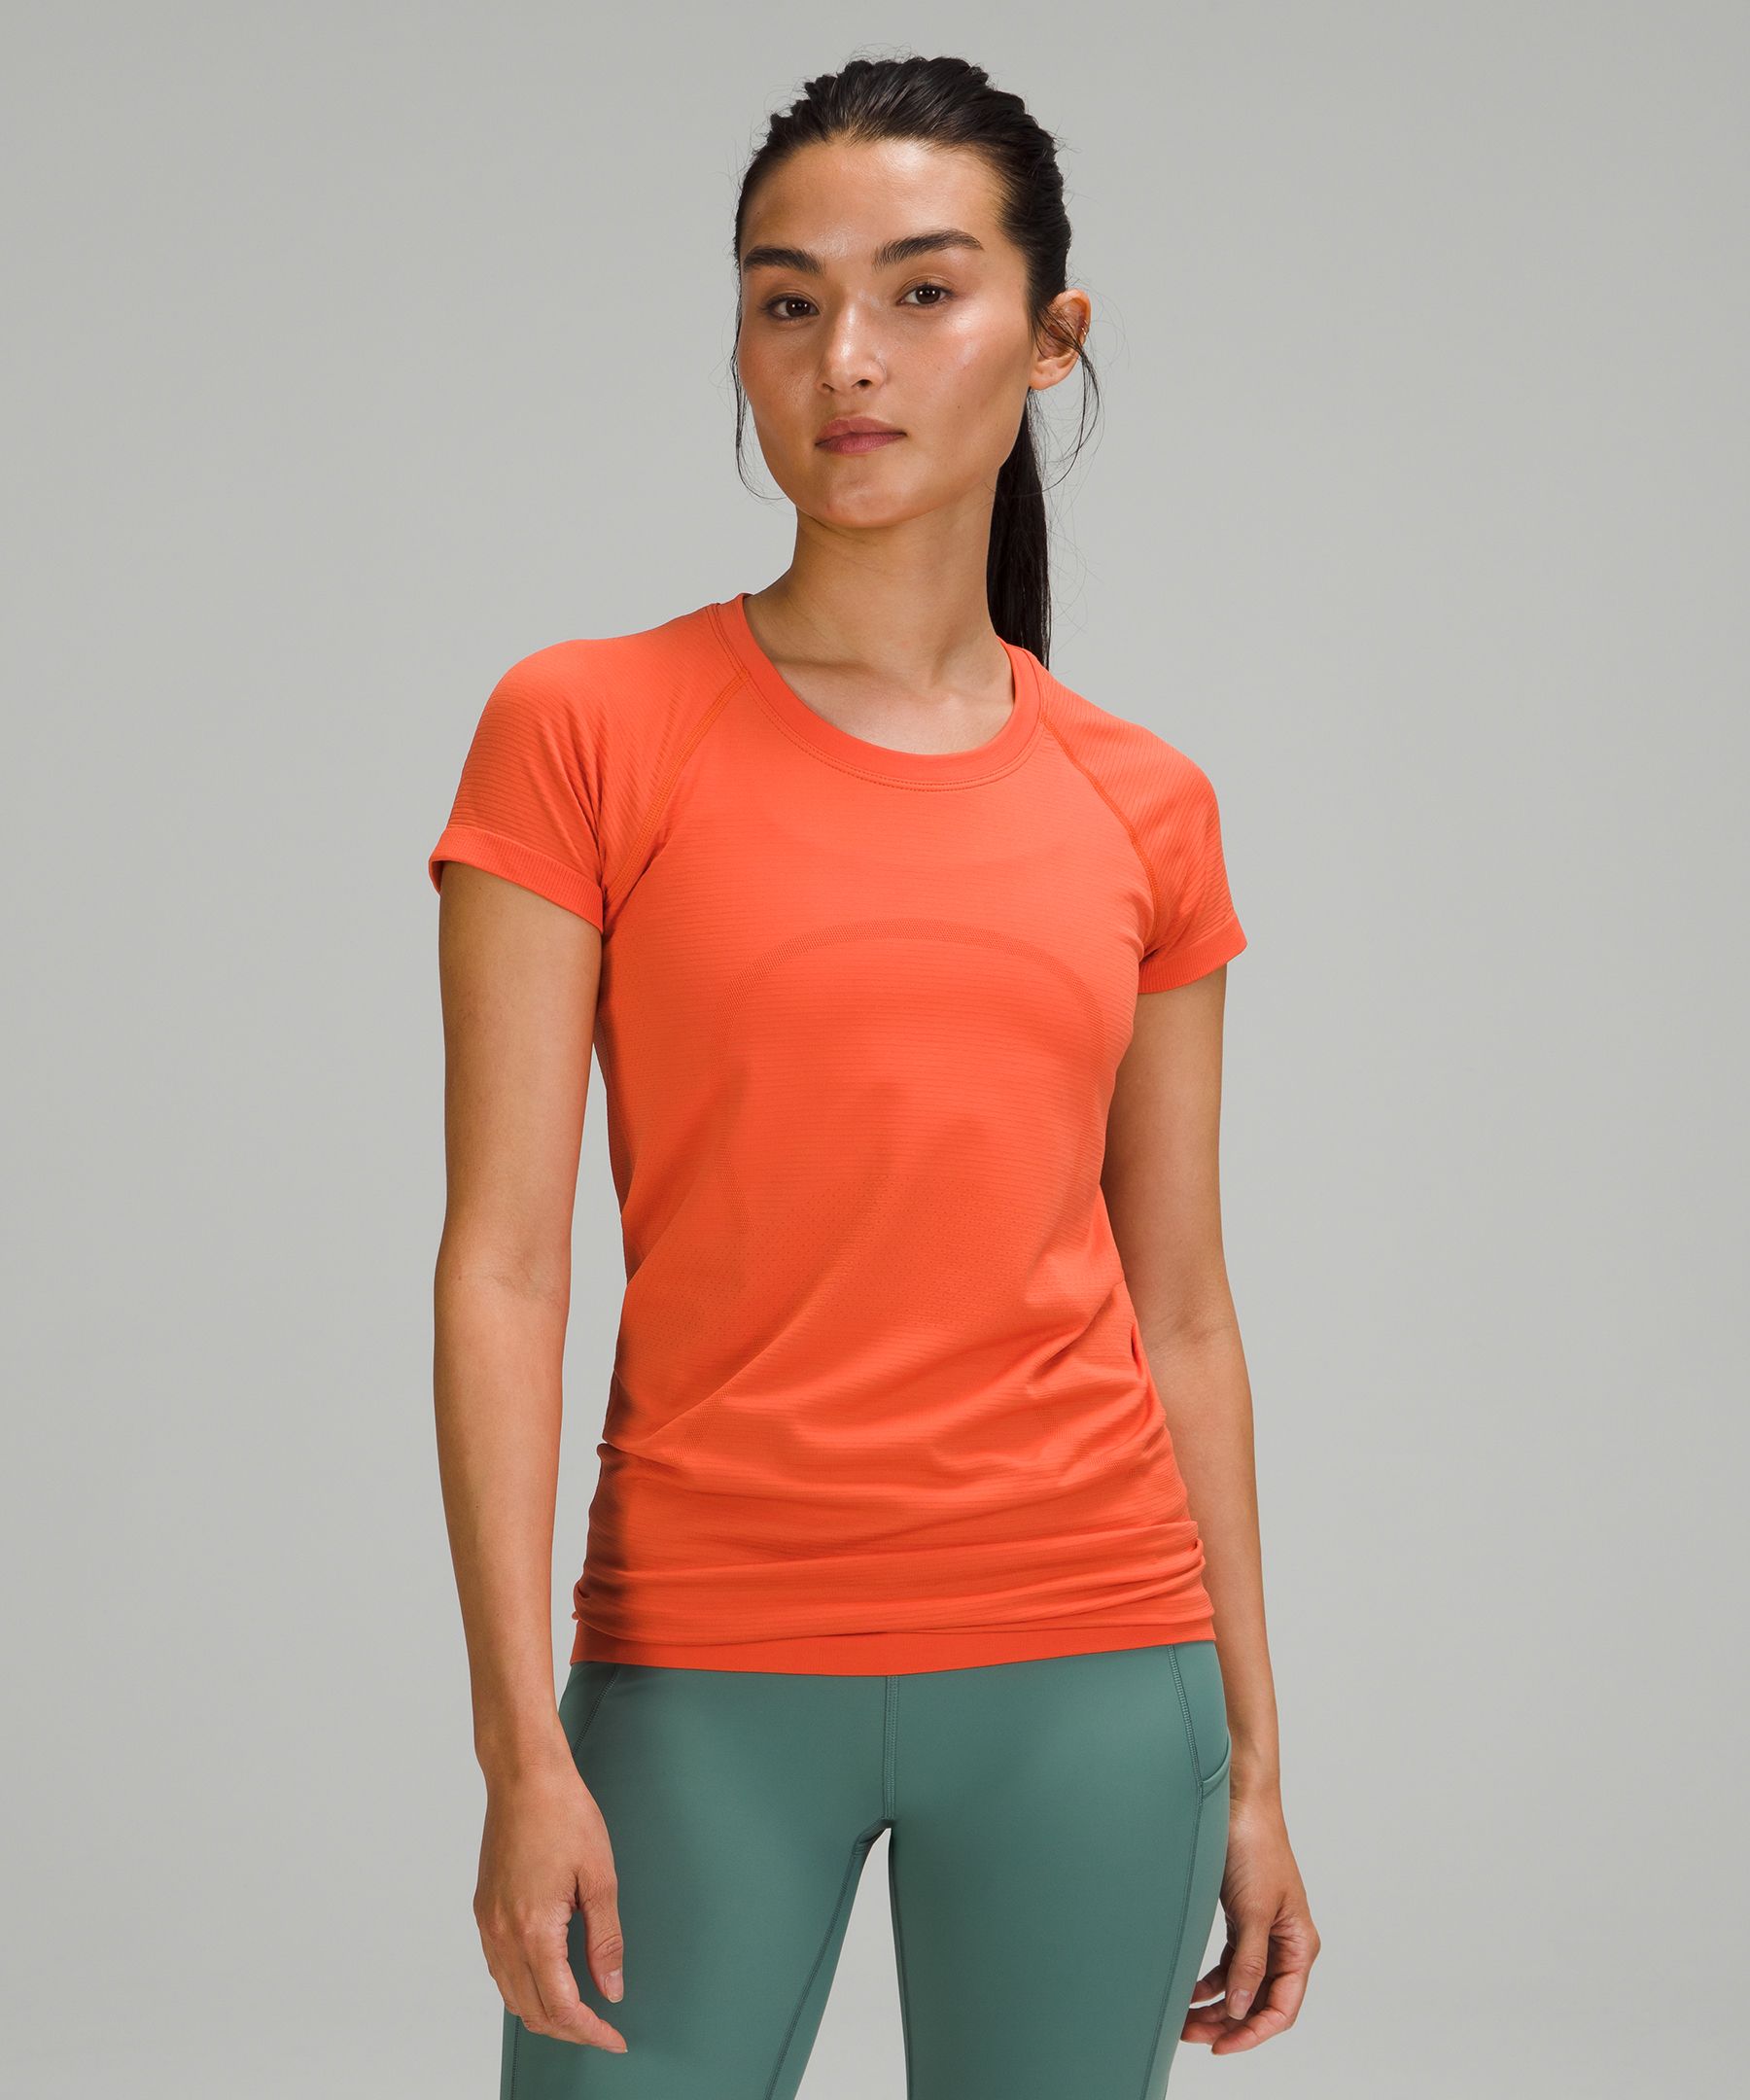 Lululemon Swiftly Tech Short Sleeve Shirt 2.0 In Warm Coral/warm Coral